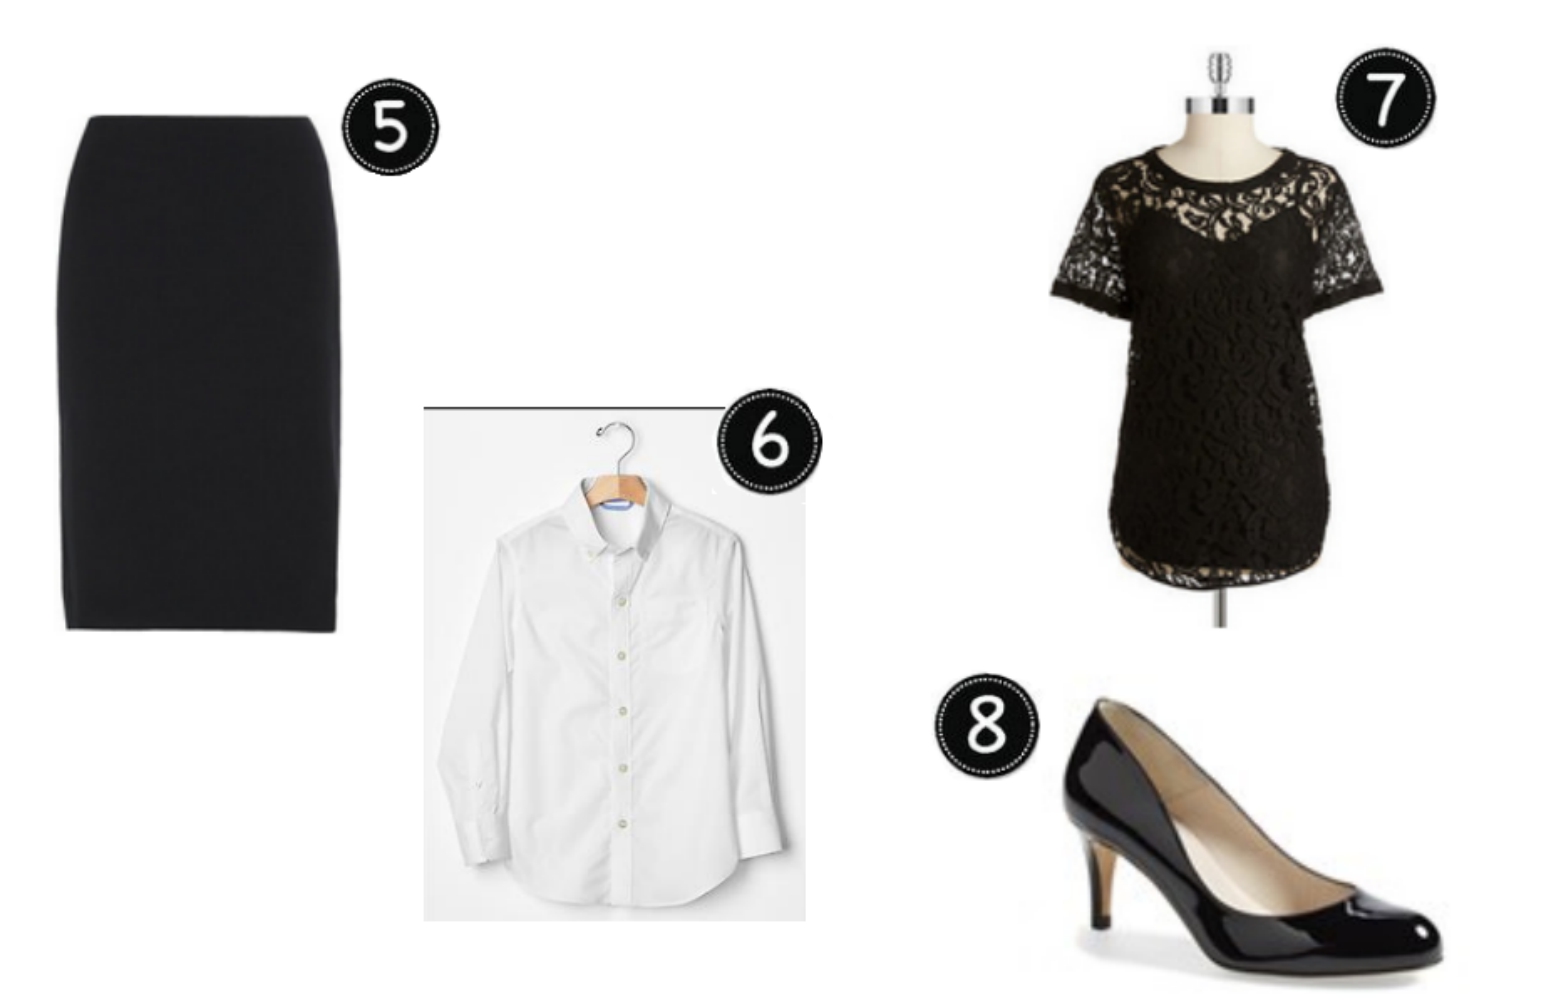 14 Essentials Every Woman Needs for Work